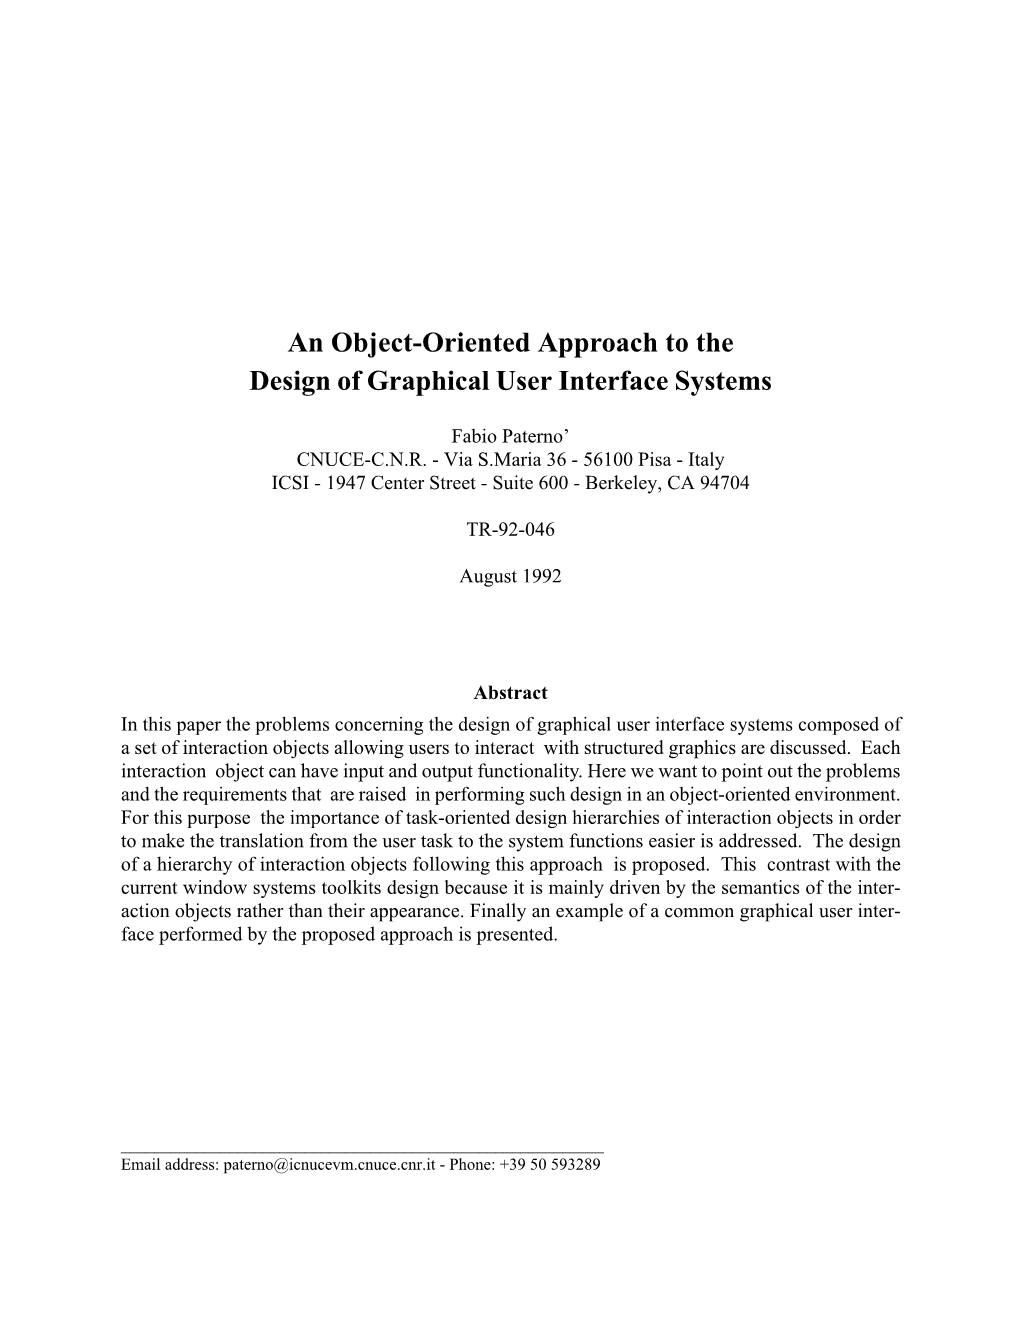 An Object-Oriented Approach to the Design of Graphical User Interface Systems